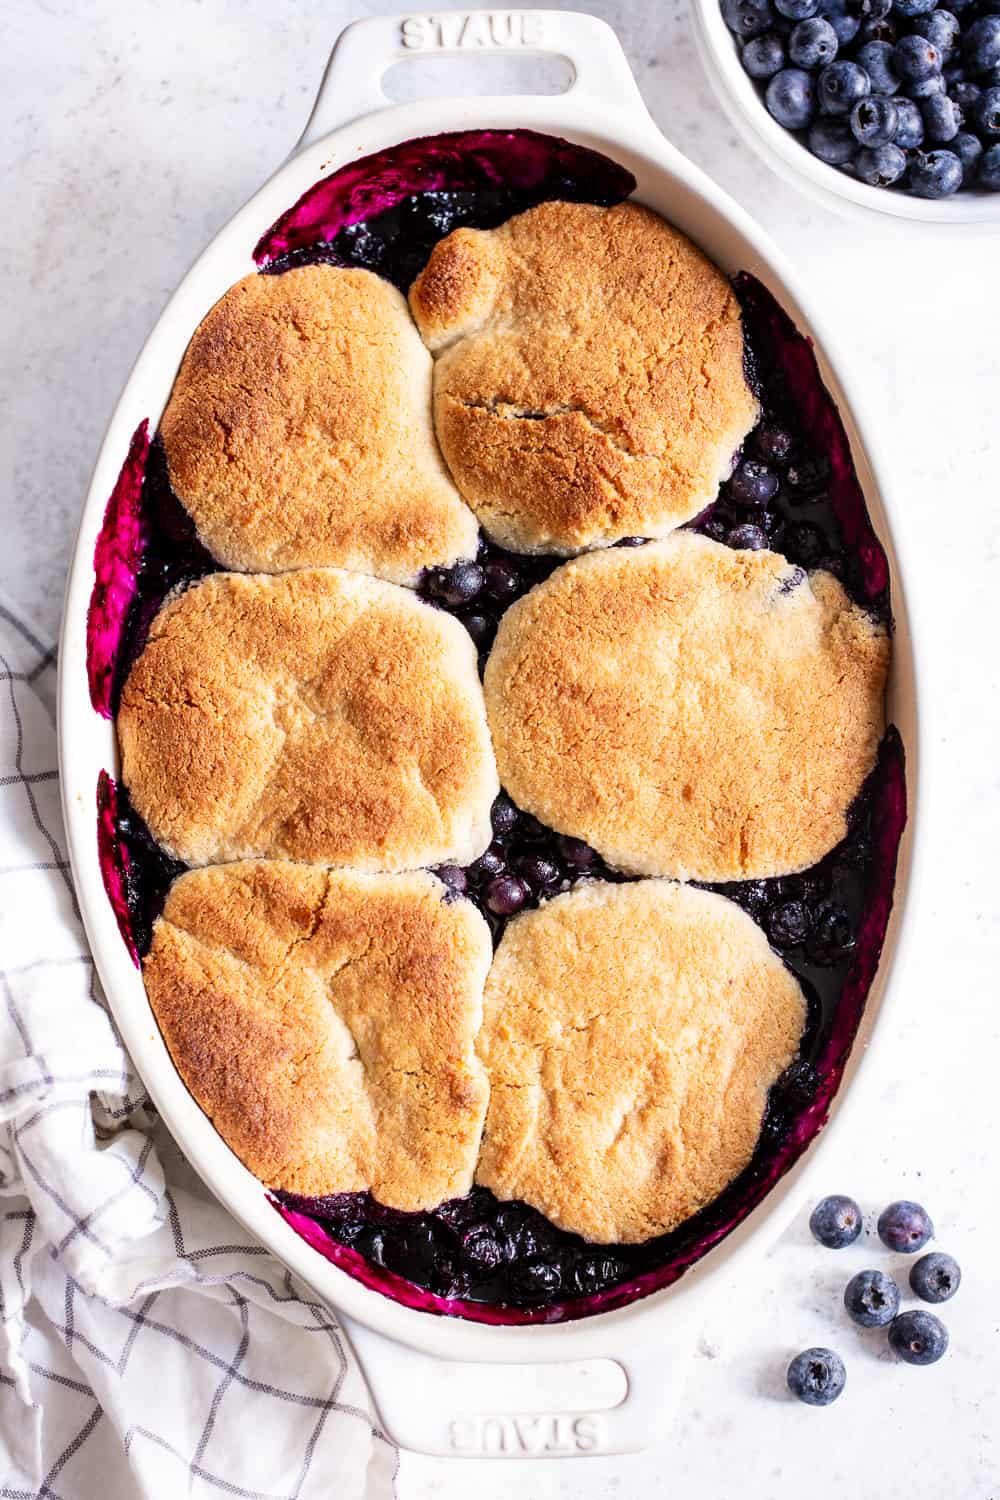 This paleo and vegan blueberry cobbler has quickly become a family favorite!  A sweet gooey blueberry layer is baked with a biscuit cobbler topping that’s gluten free, dairy free, and egg free.  It’s perfect served with a big scoop of coconut vanilla ice cream or on its own!  Easy to make and the perfect healthy dessert for Spring and Summer. #paleo #vegan #cobbler #glutenfree #paleobaking #cleaneating #glutenfreedessert